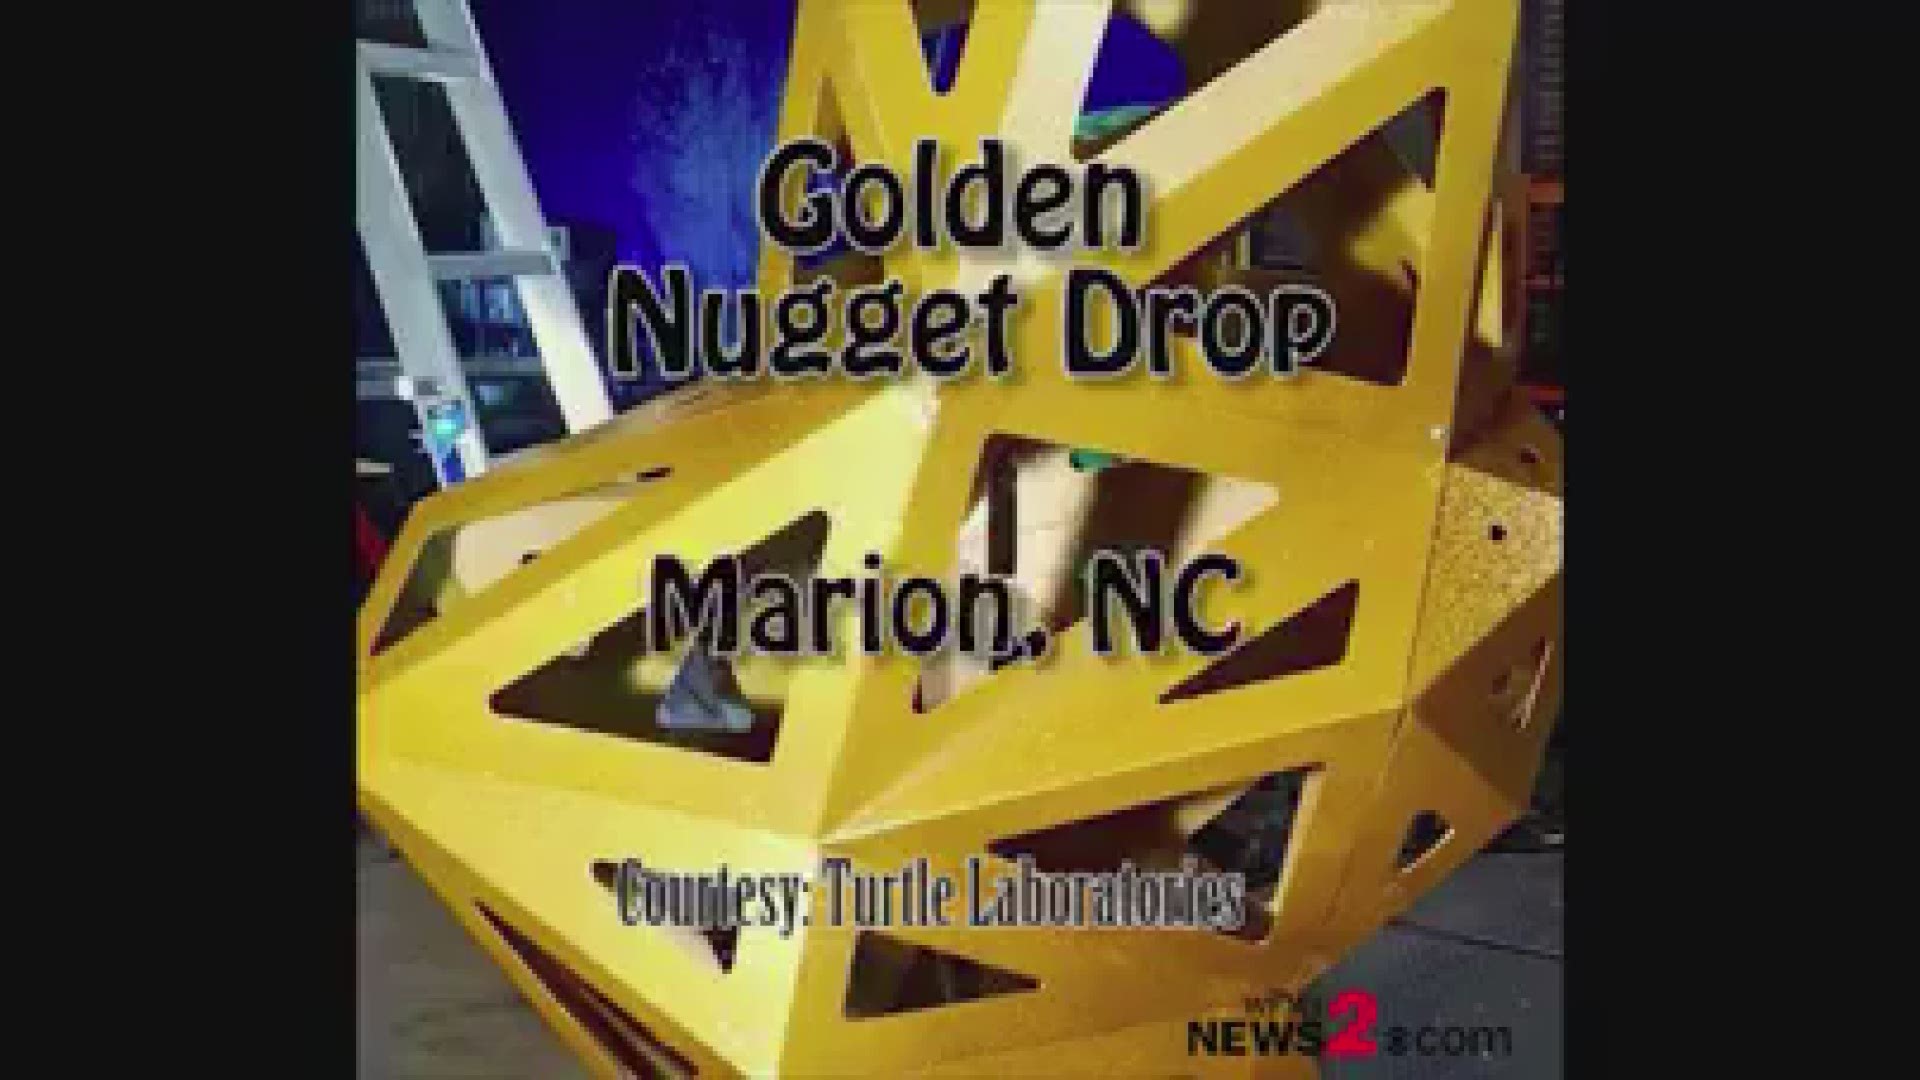 North Carolina drops some pretty weird things on New Year's Eve!